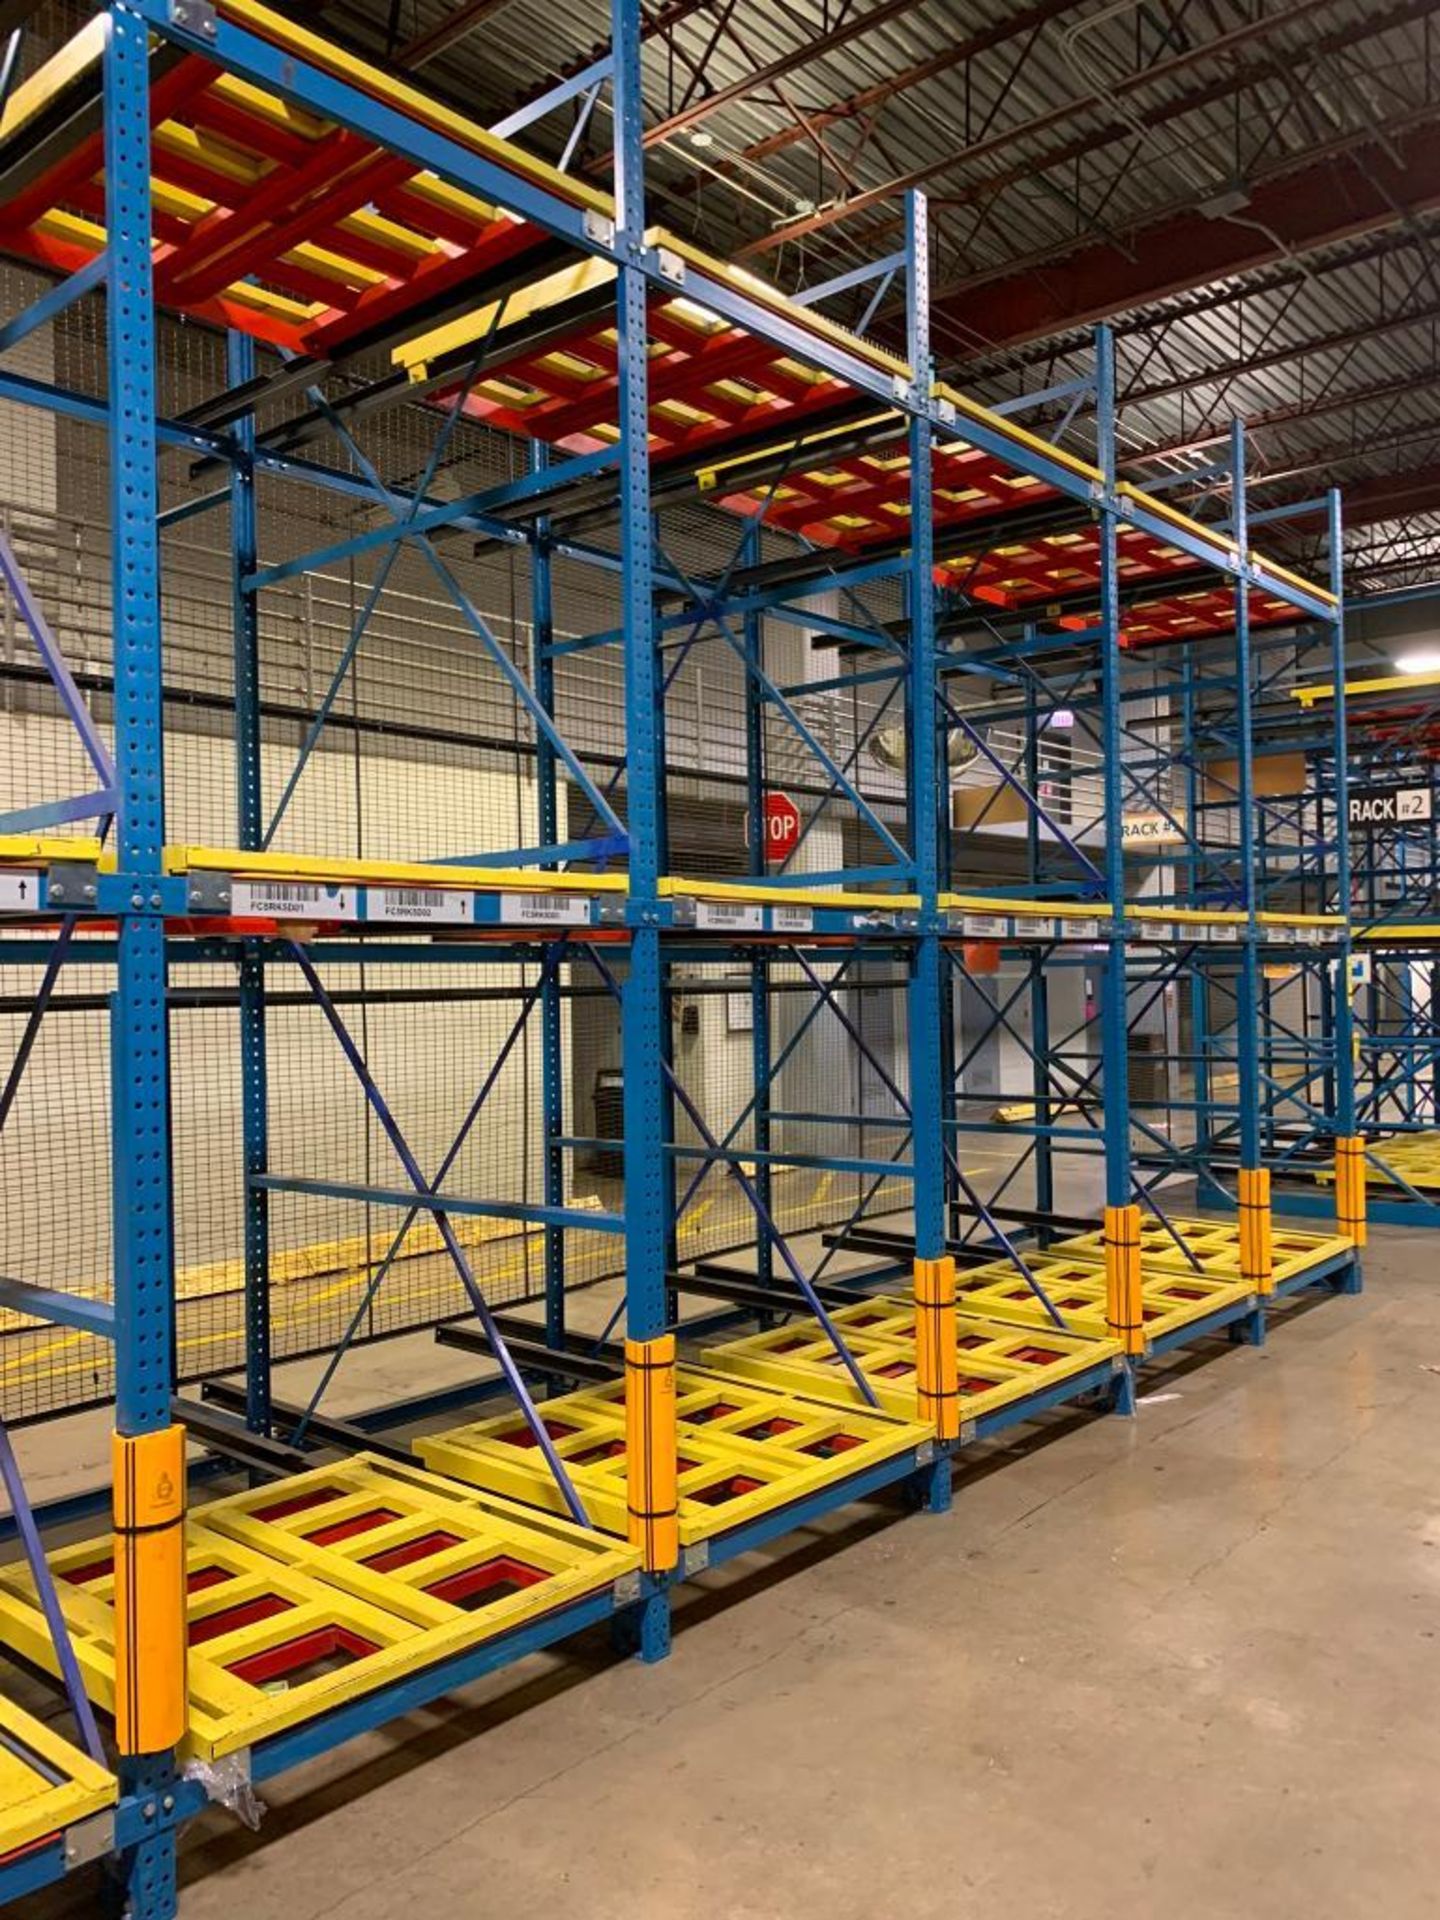 (12x) Bays of Bolt-Together Push-Back Pallet Rack; 15' T X 104" D, Each Bay Has (6) Pallet Positions - Image 5 of 12